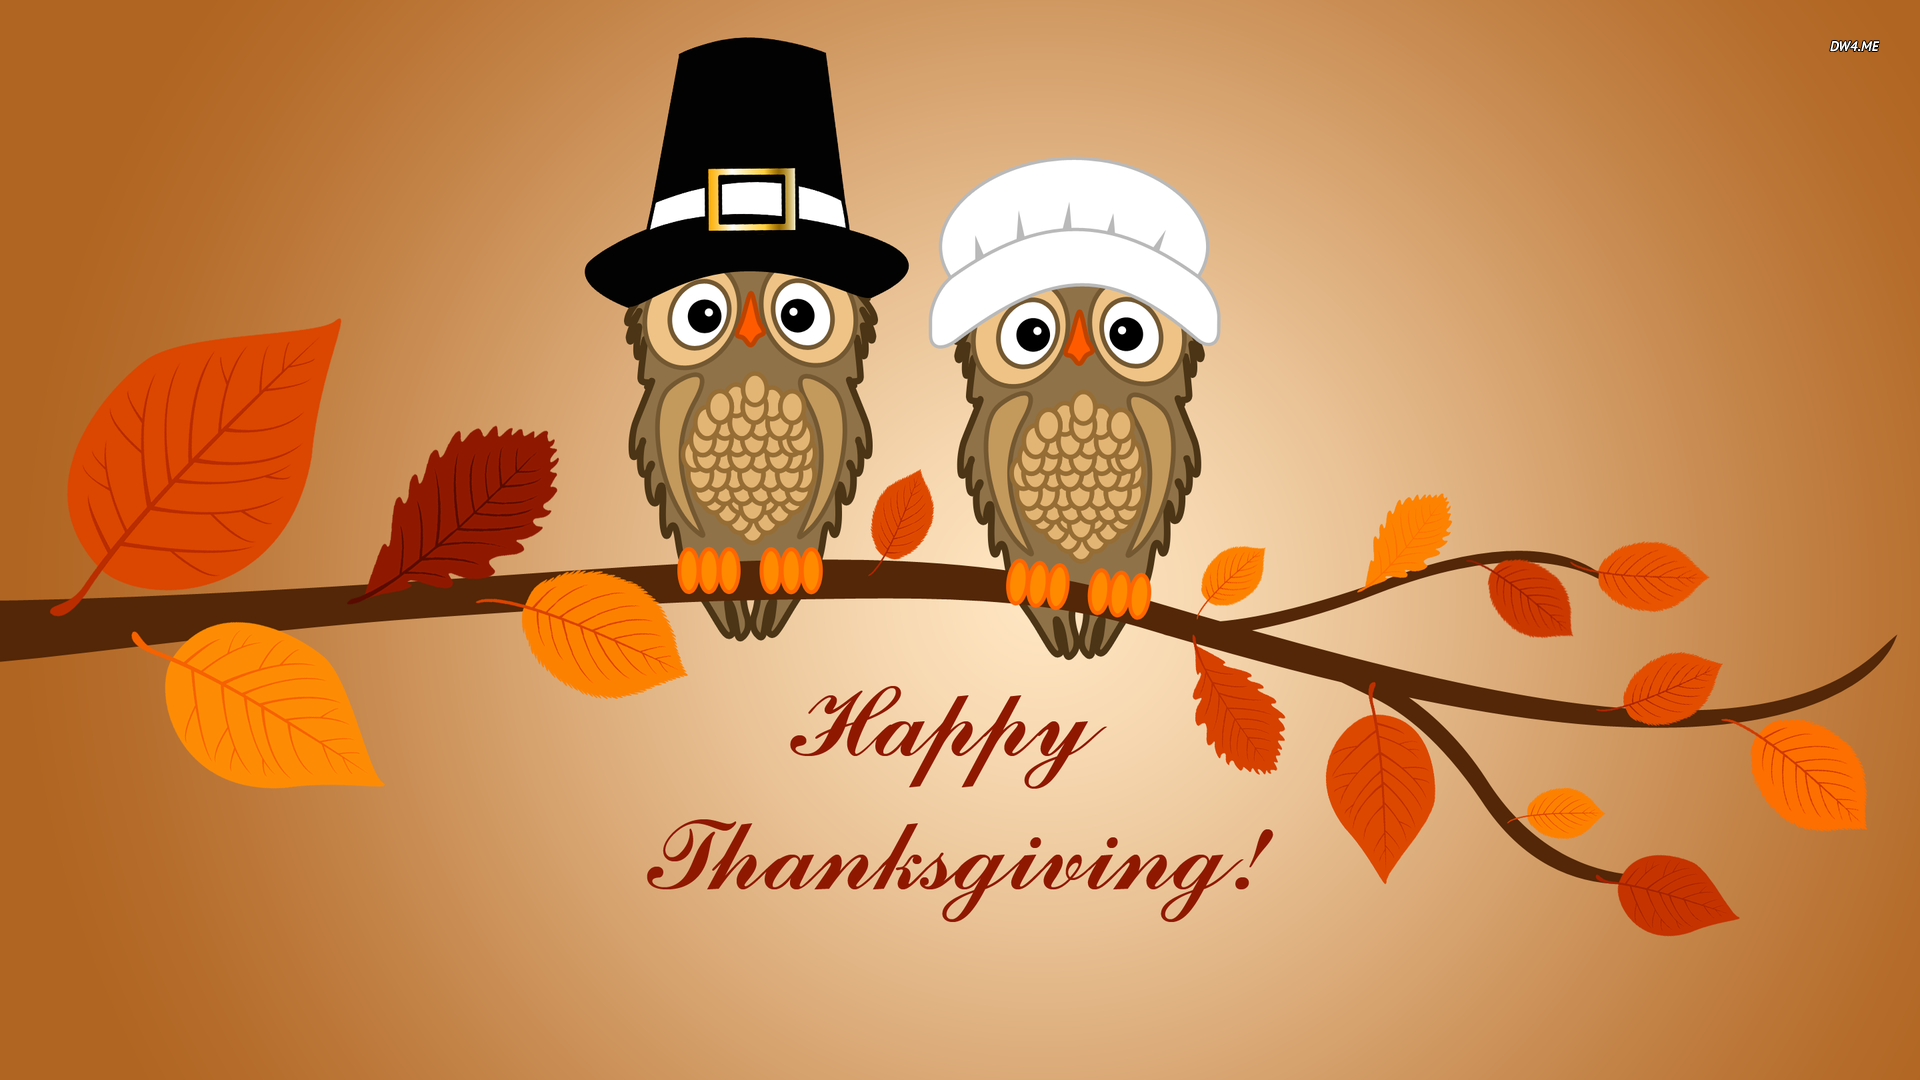 Happy Thanksgiving Pictures Image Pics Photos Wallpaper